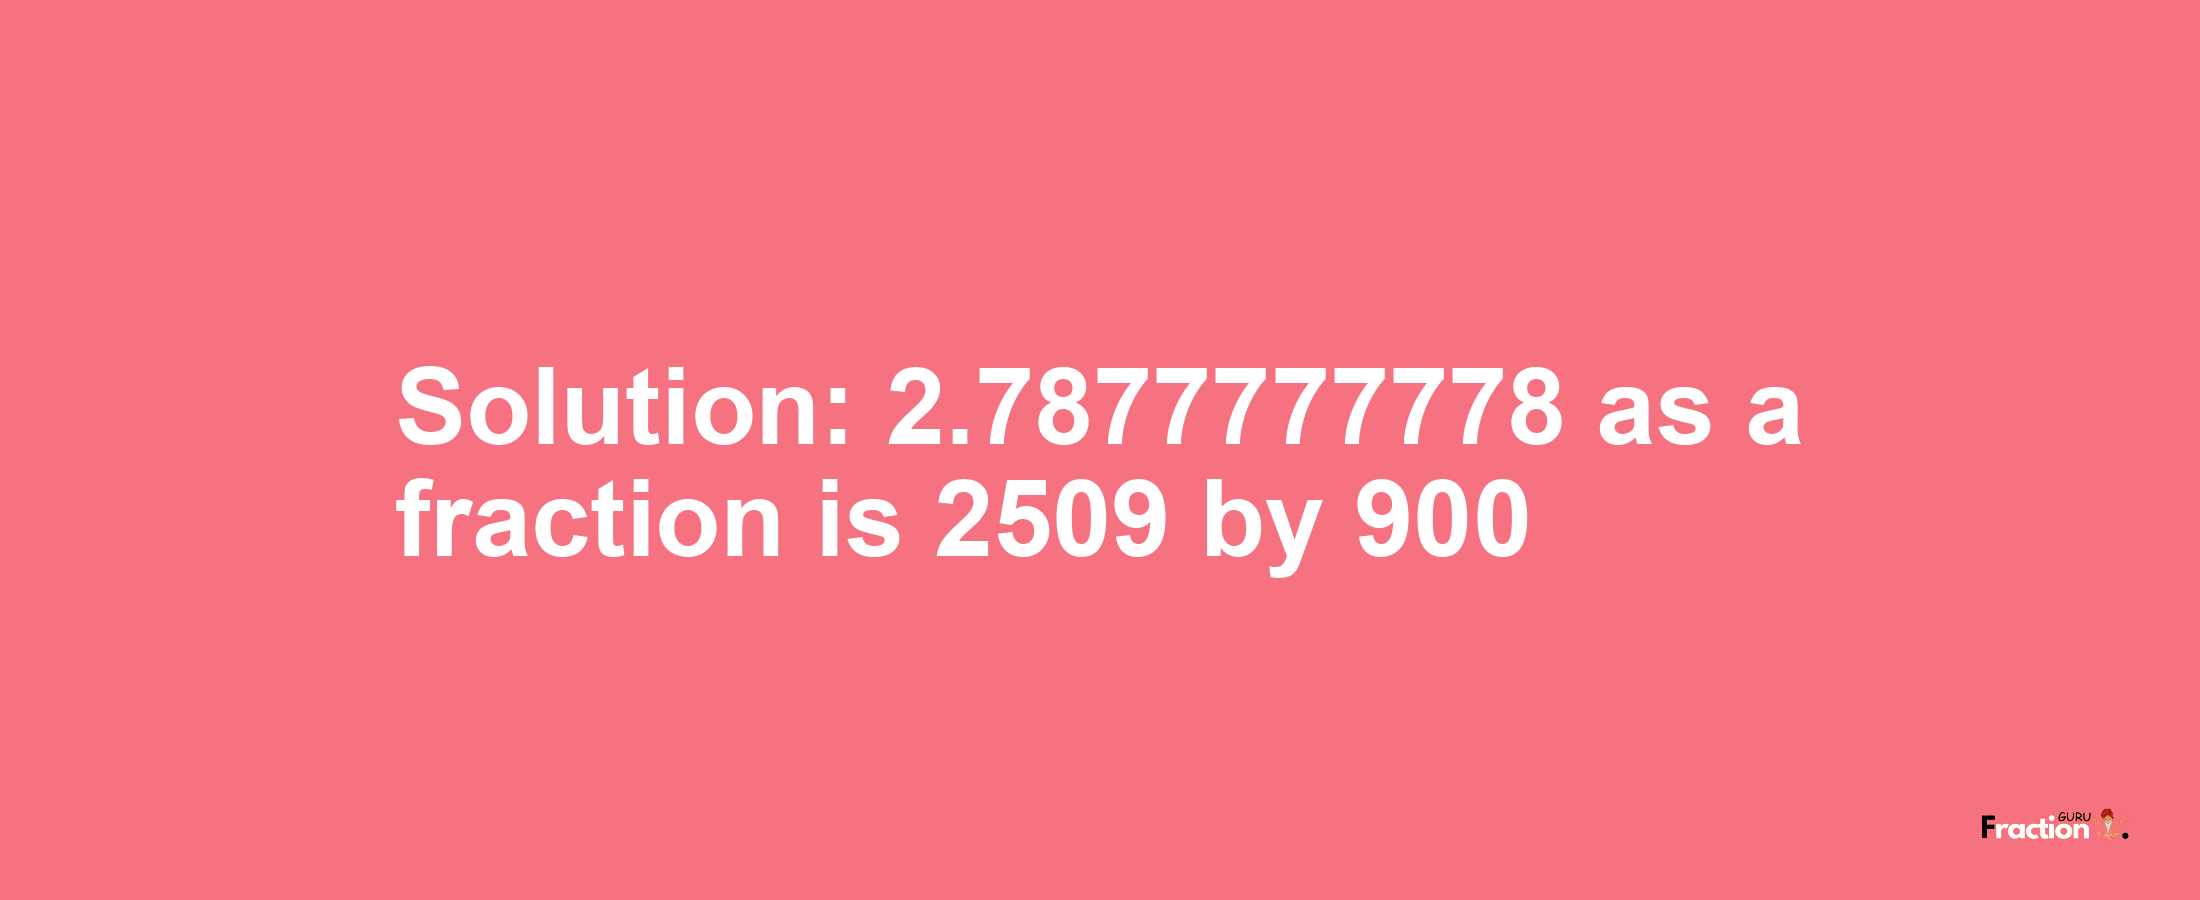 Solution:2.7877777778 as a fraction is 2509/900